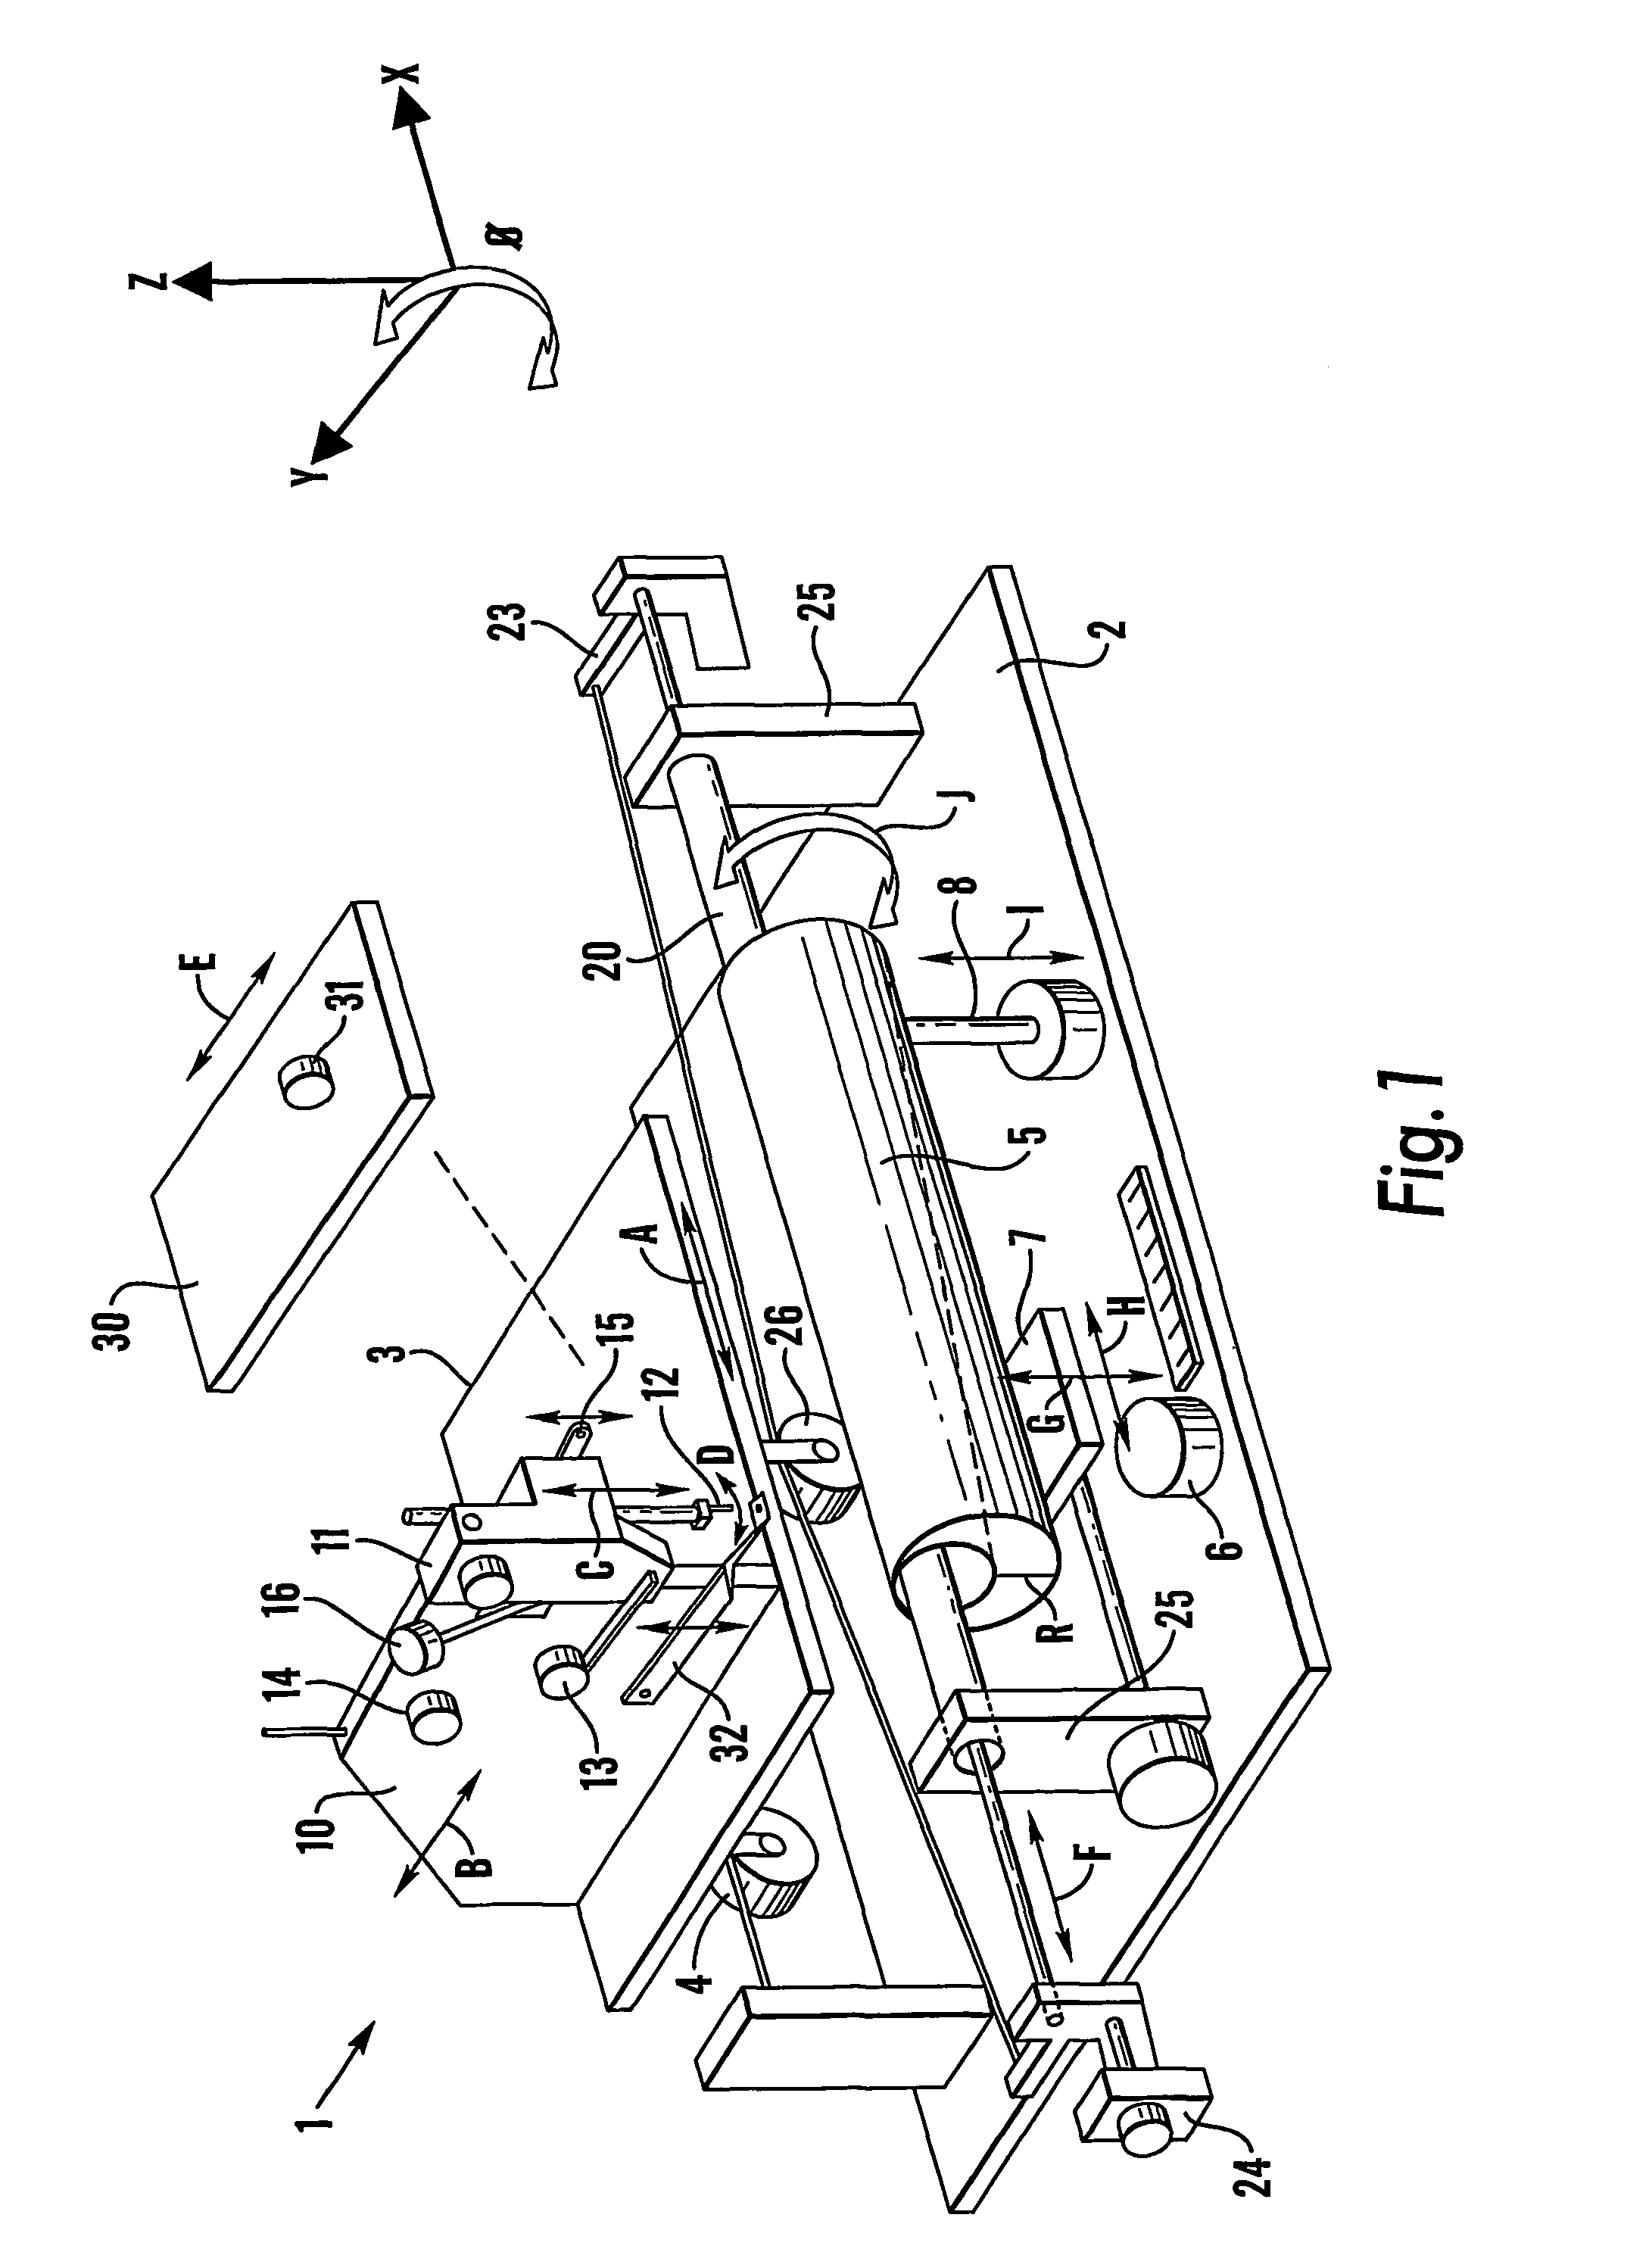 Method for manufacturing stent-grafts